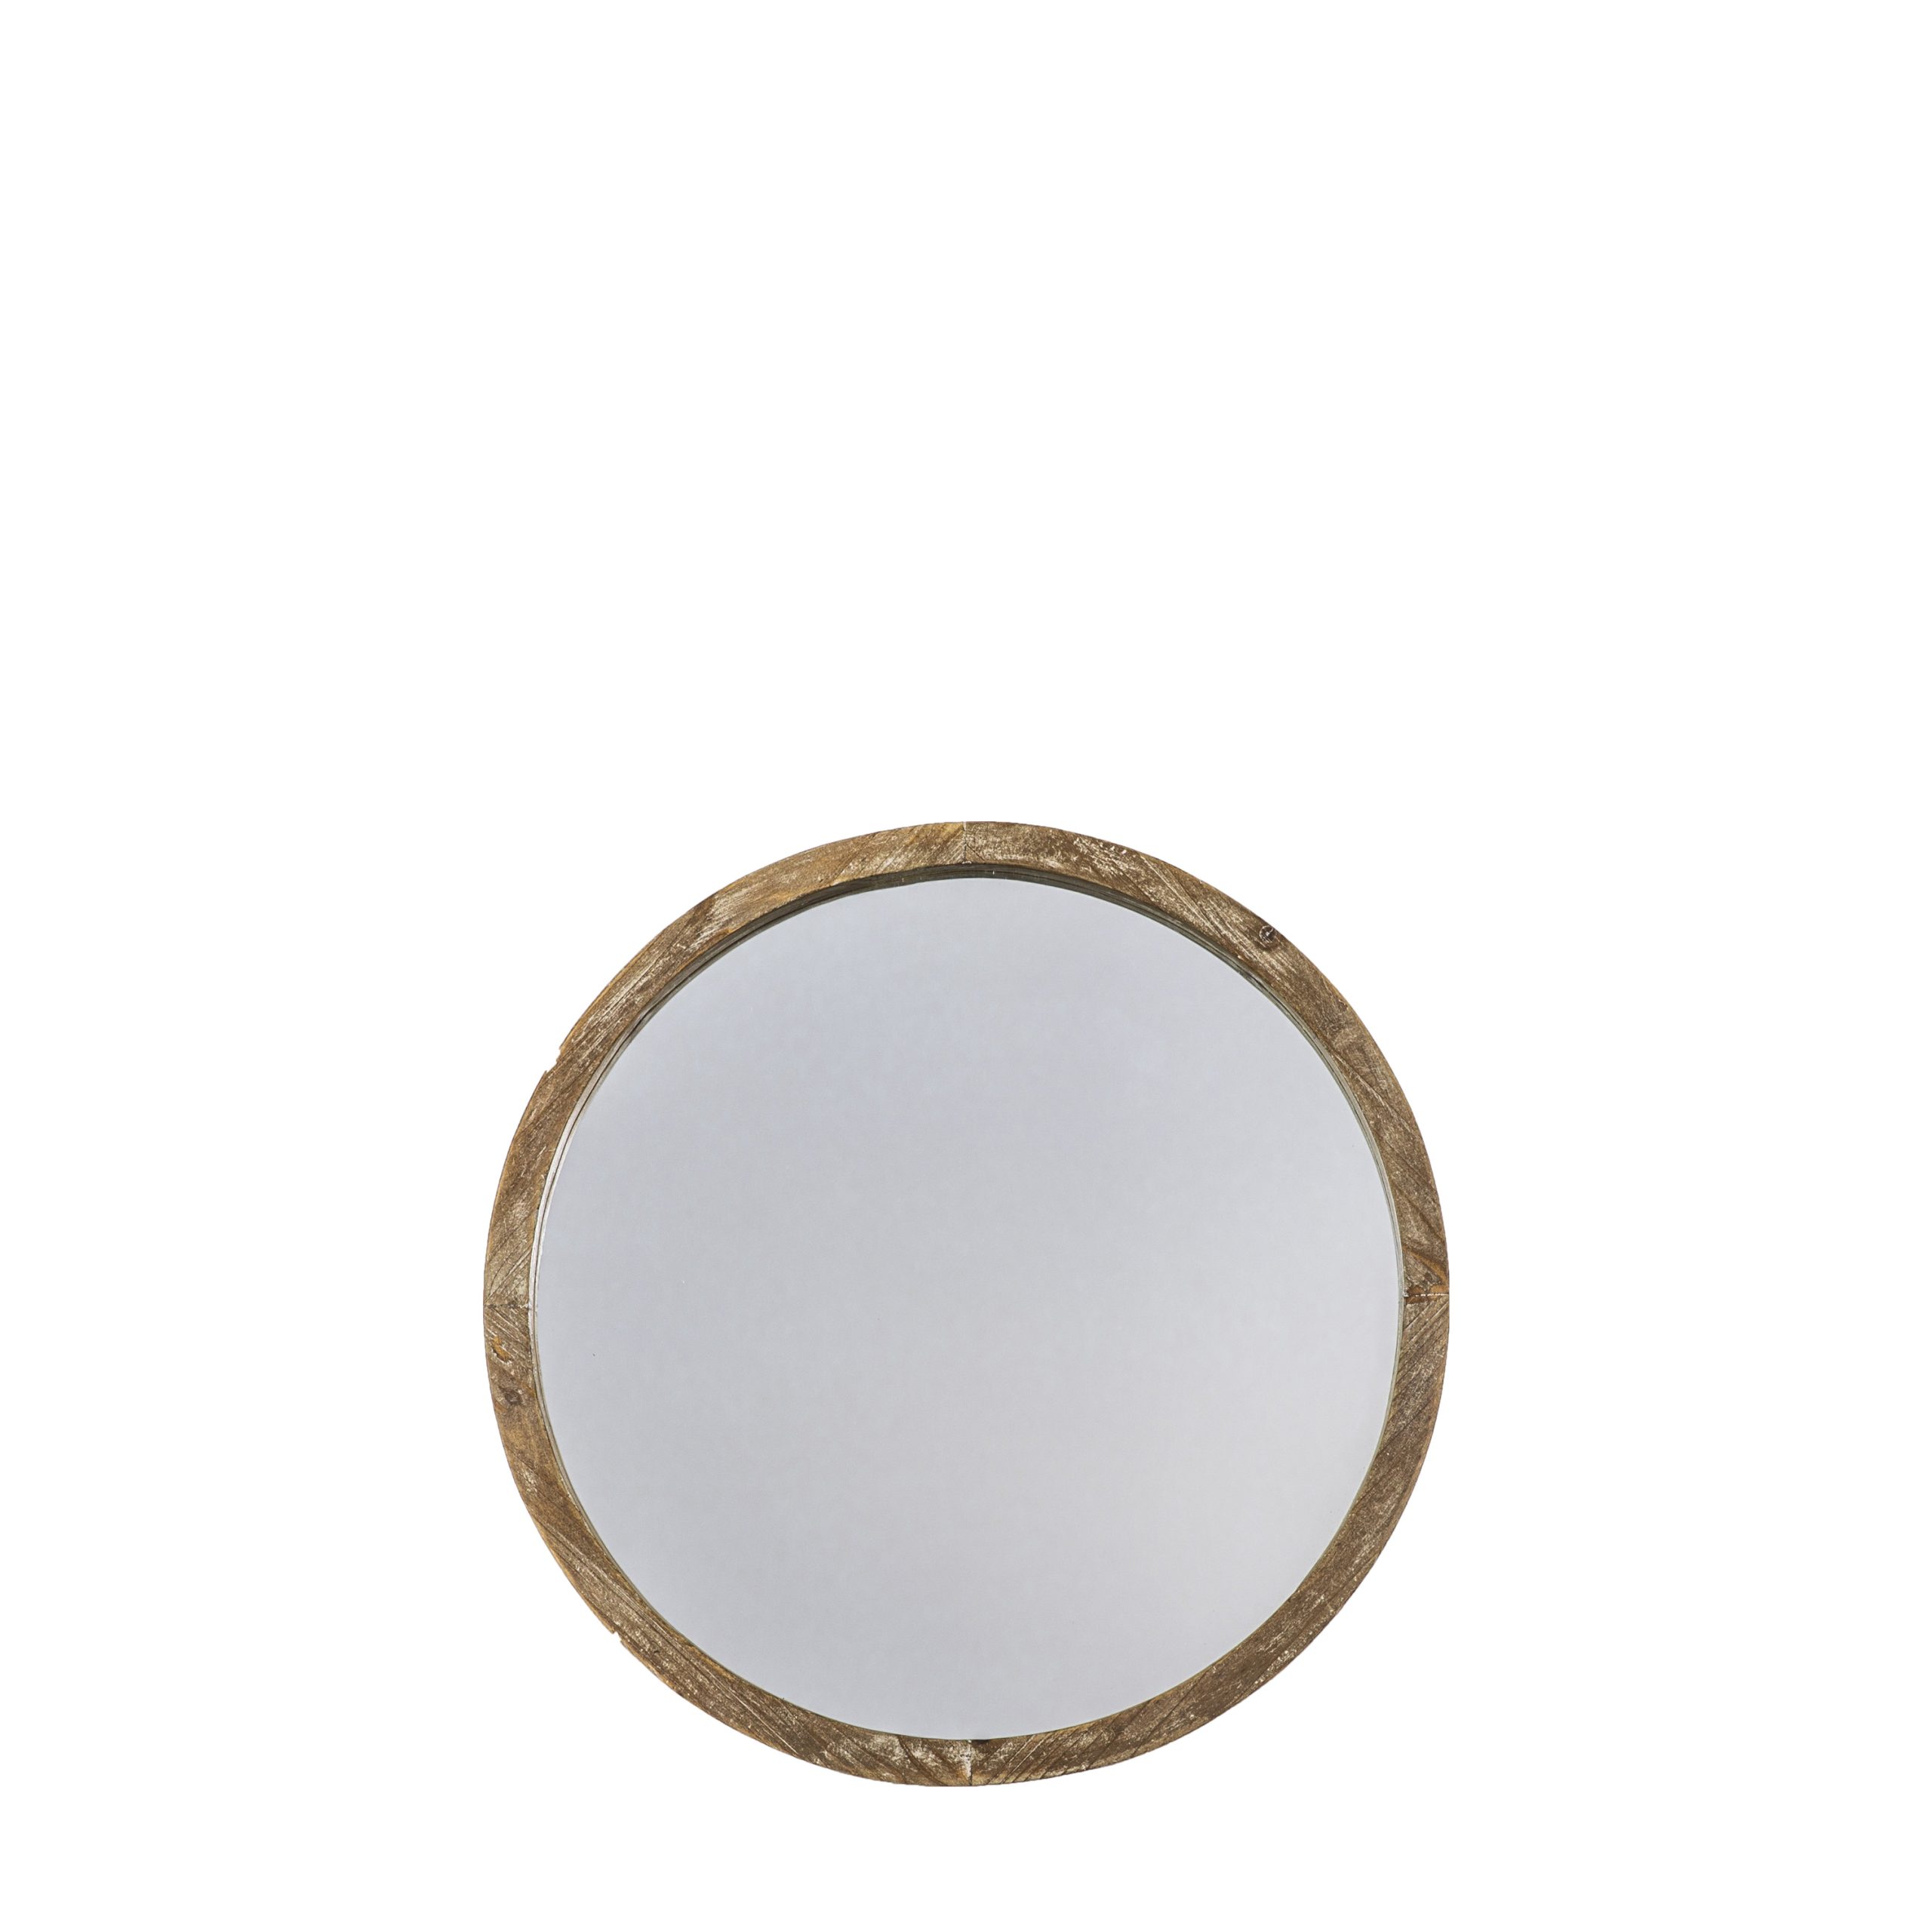 Gallery Direct Hector Mirror Round Small Natural